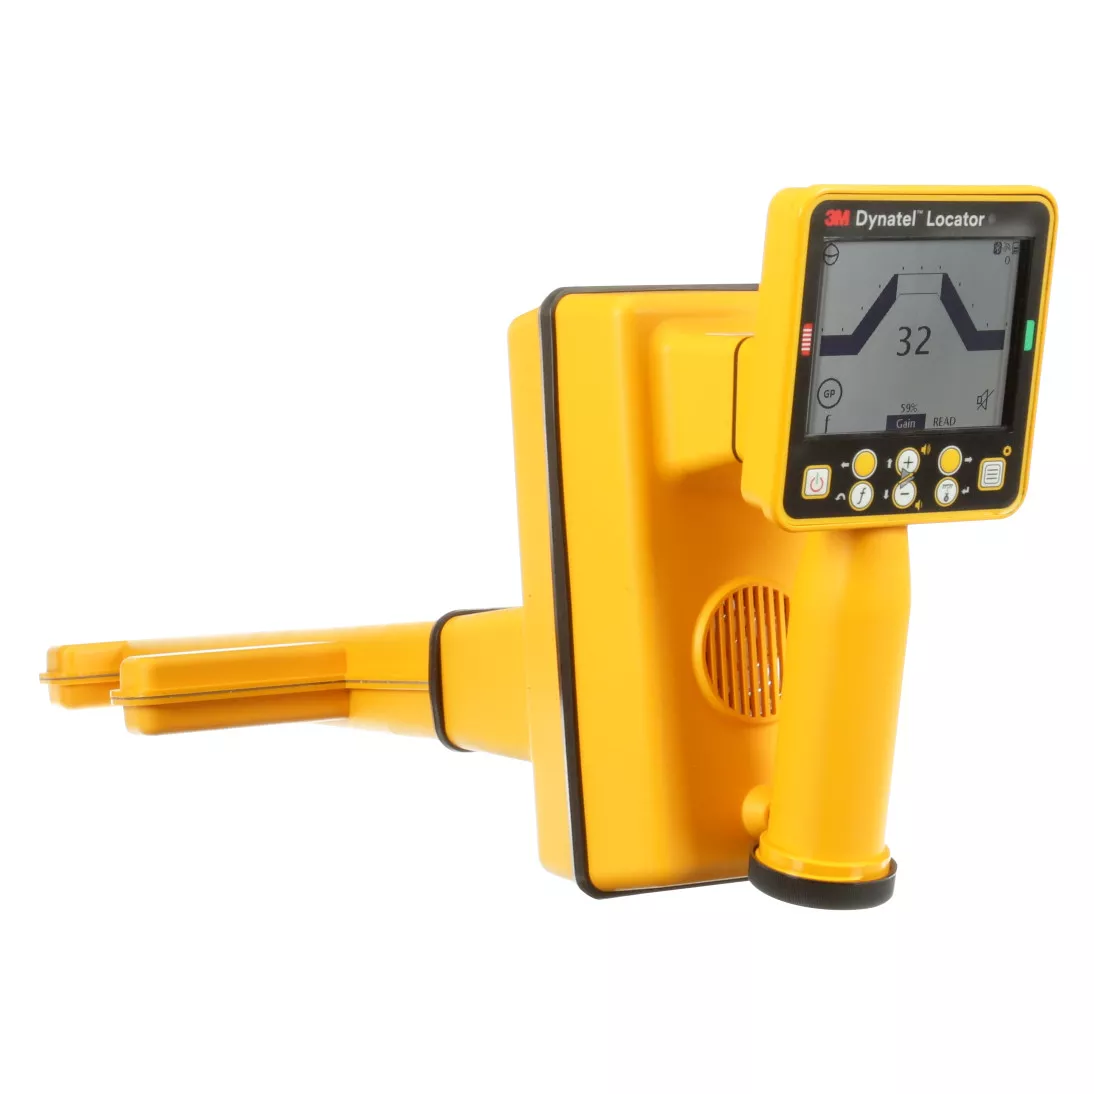 3M™ Dynatel™ Locator 2550X EMS/ID, Marker/Cable/Pipe, Locator Only,
1/Case